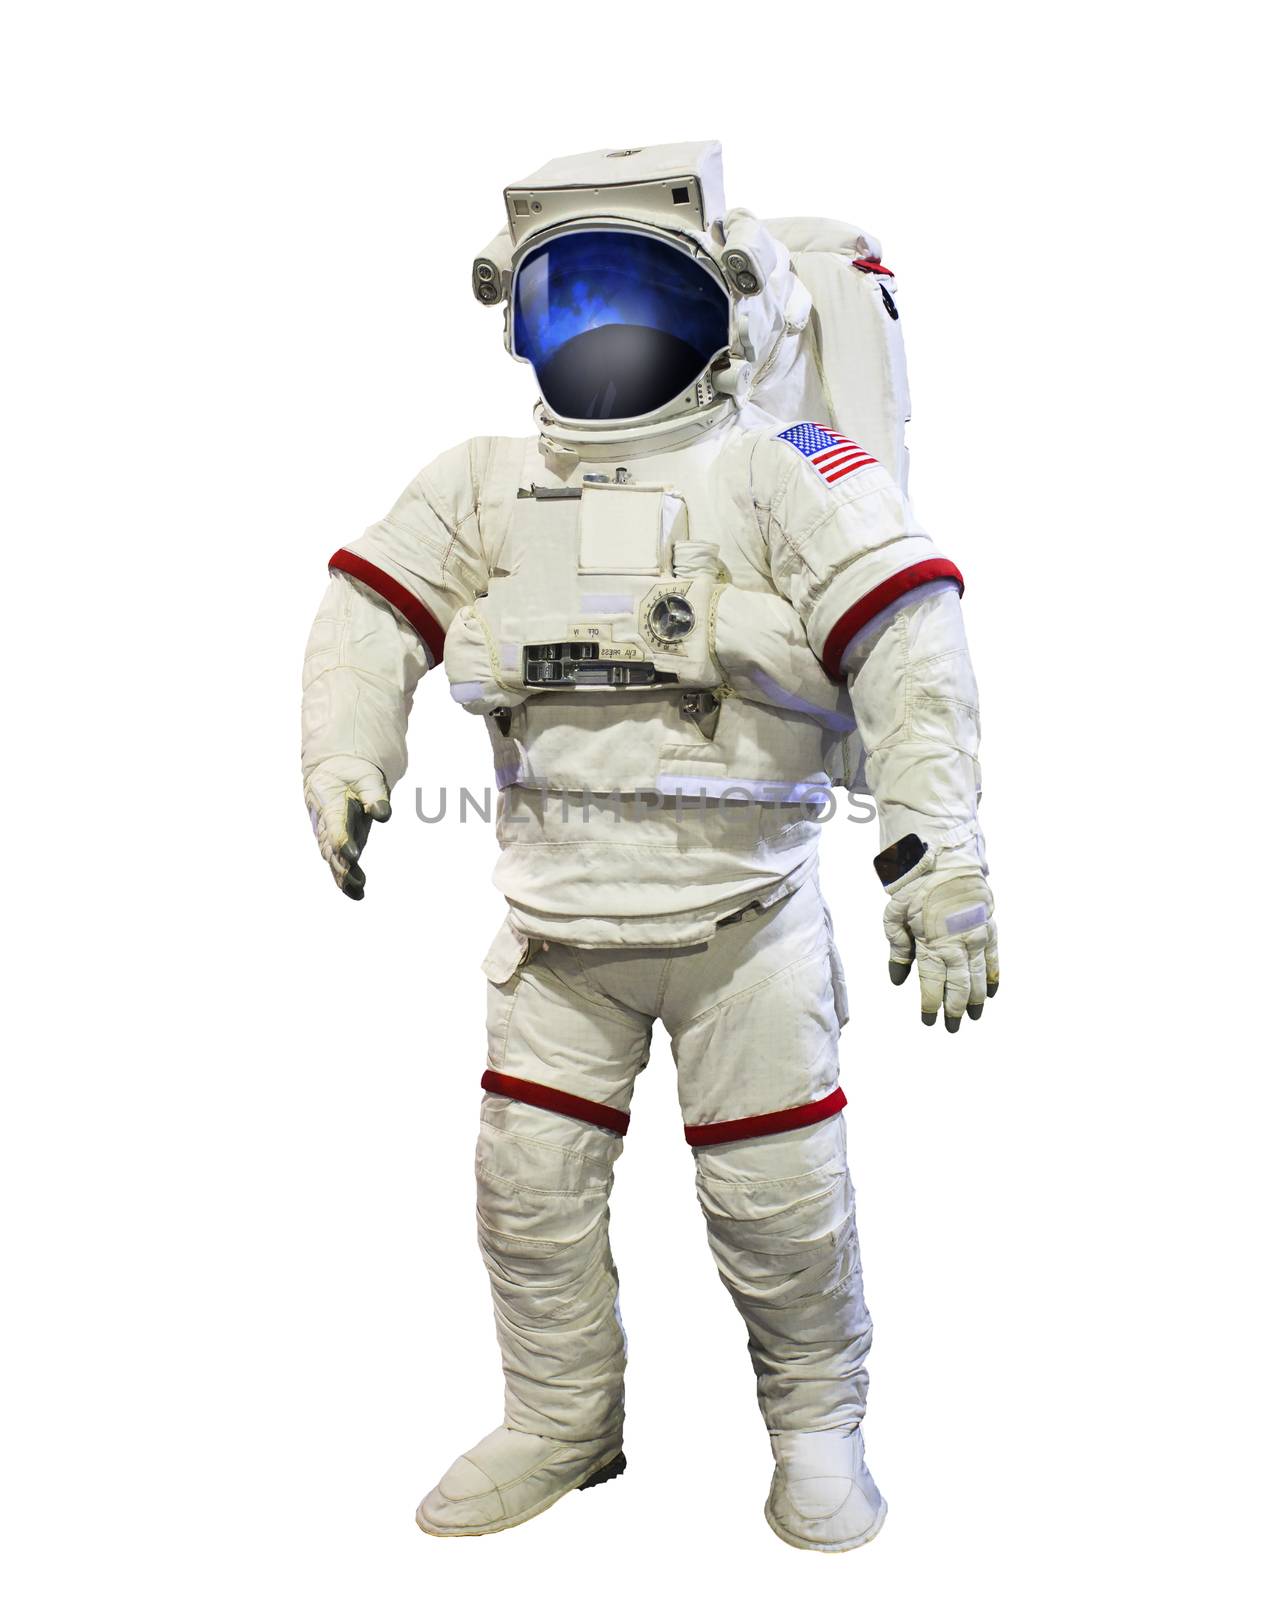 nasa astronaut pressure suit with galaxi space reflection on hel by khunaspix